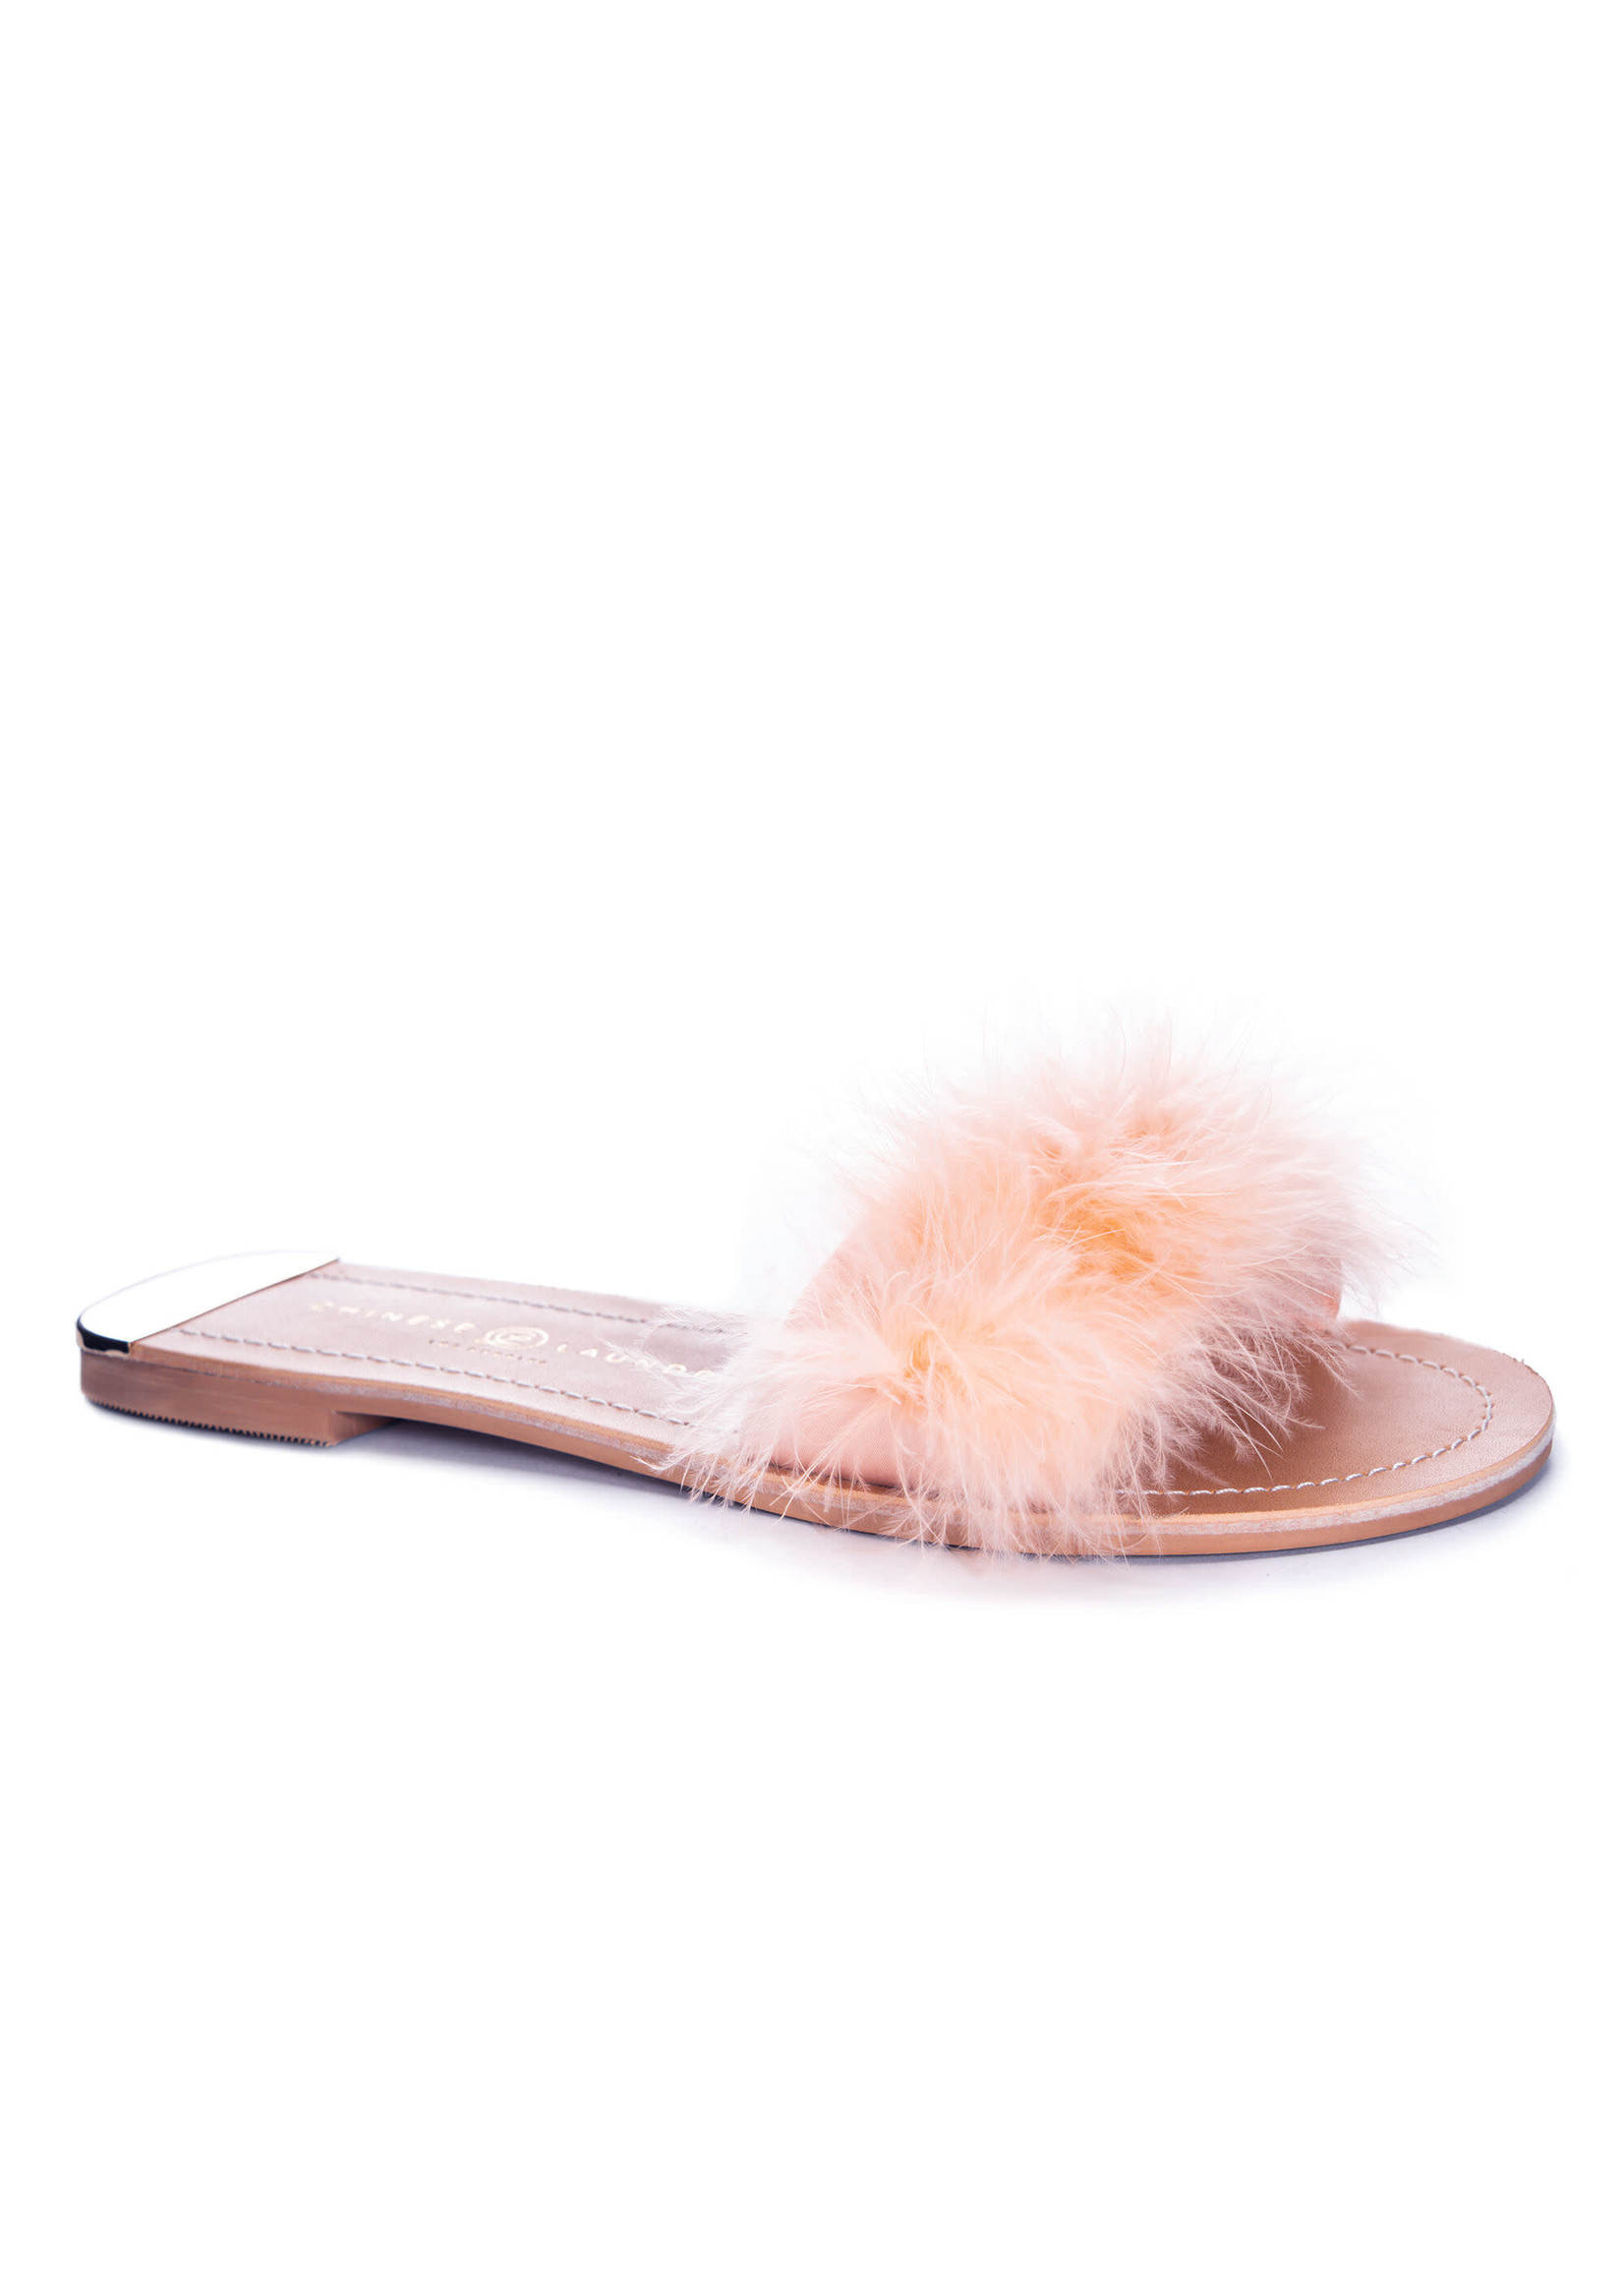 Chinese Laundry Zoey Slide Pink Marabou Feathers by Chinese Laundry Final Sale No Box